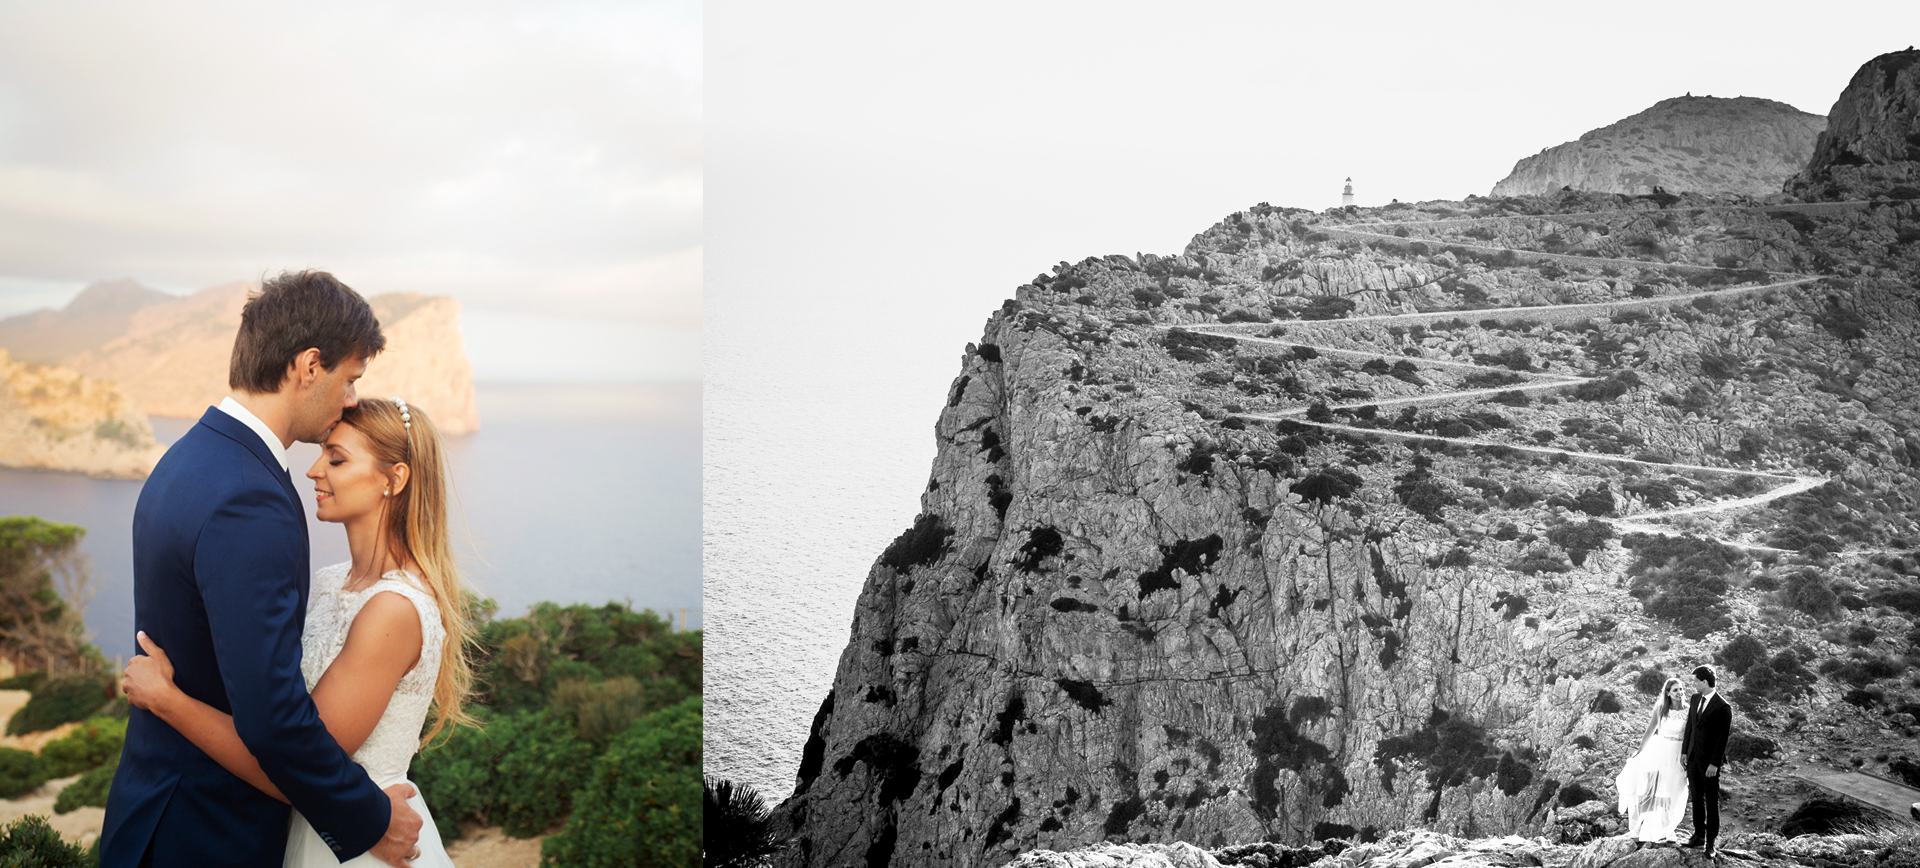 mallorca sunrise beach elopement package in formentor - bride and groom at their wedding day in mallorca